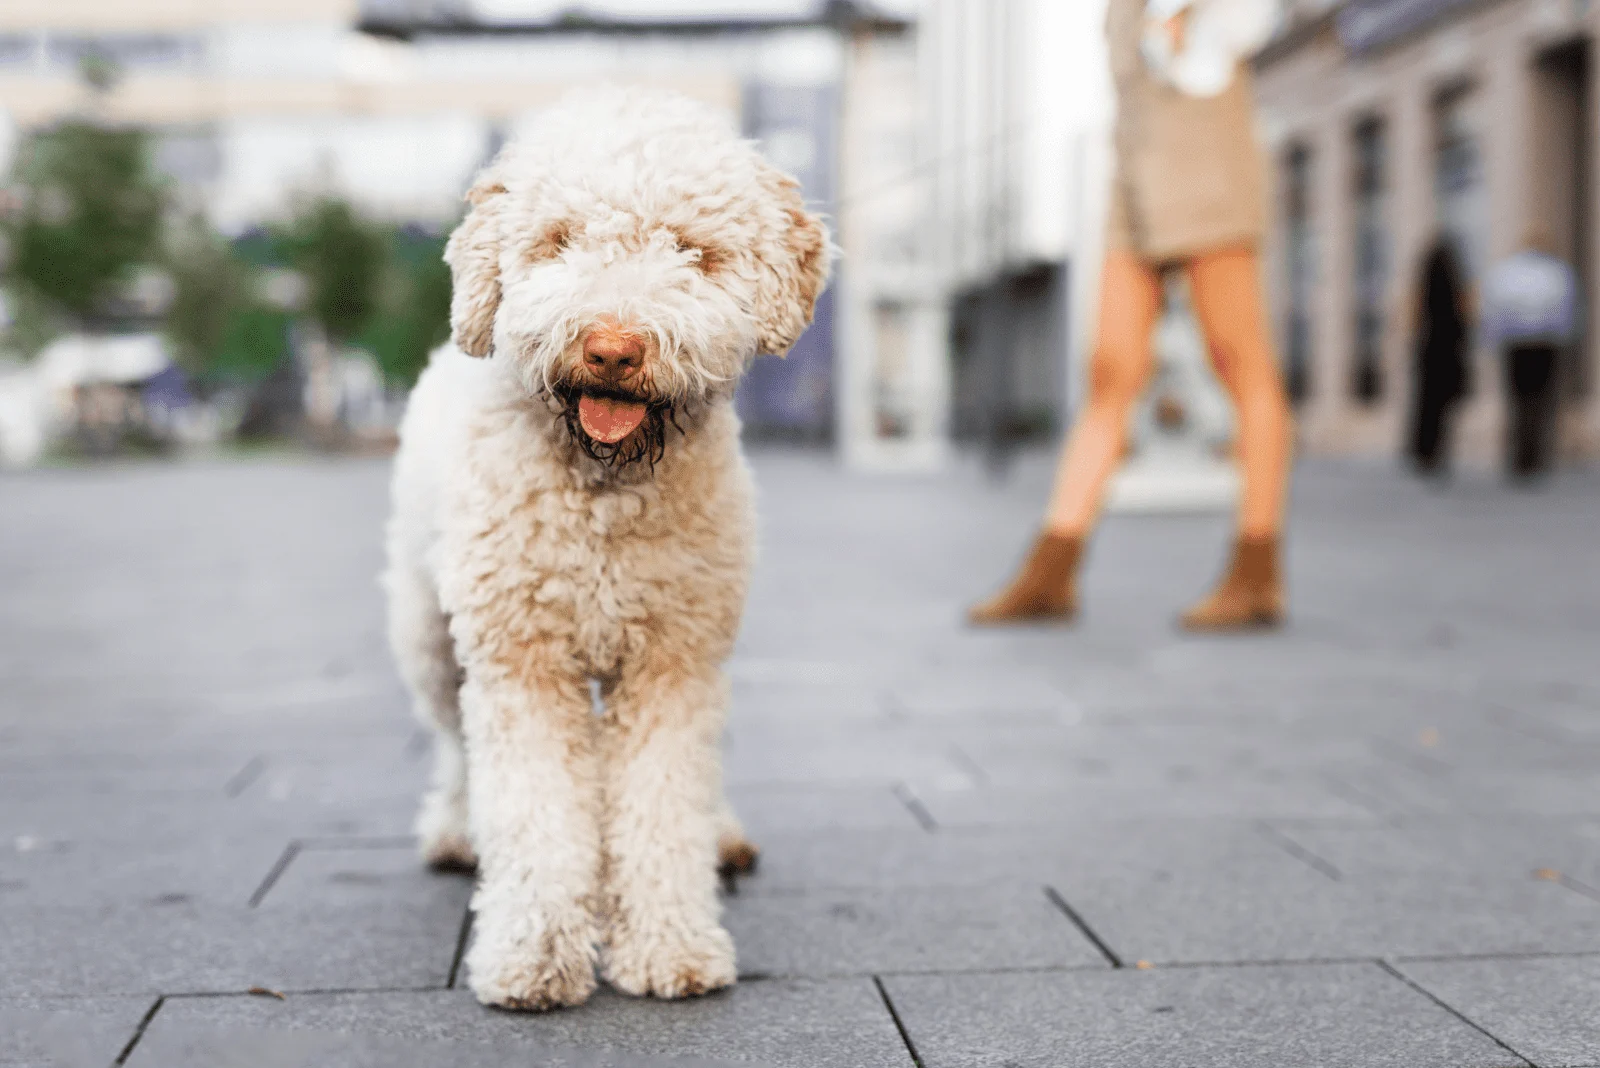 Albino Lagotto Romagnolo is standing and looking at the camera